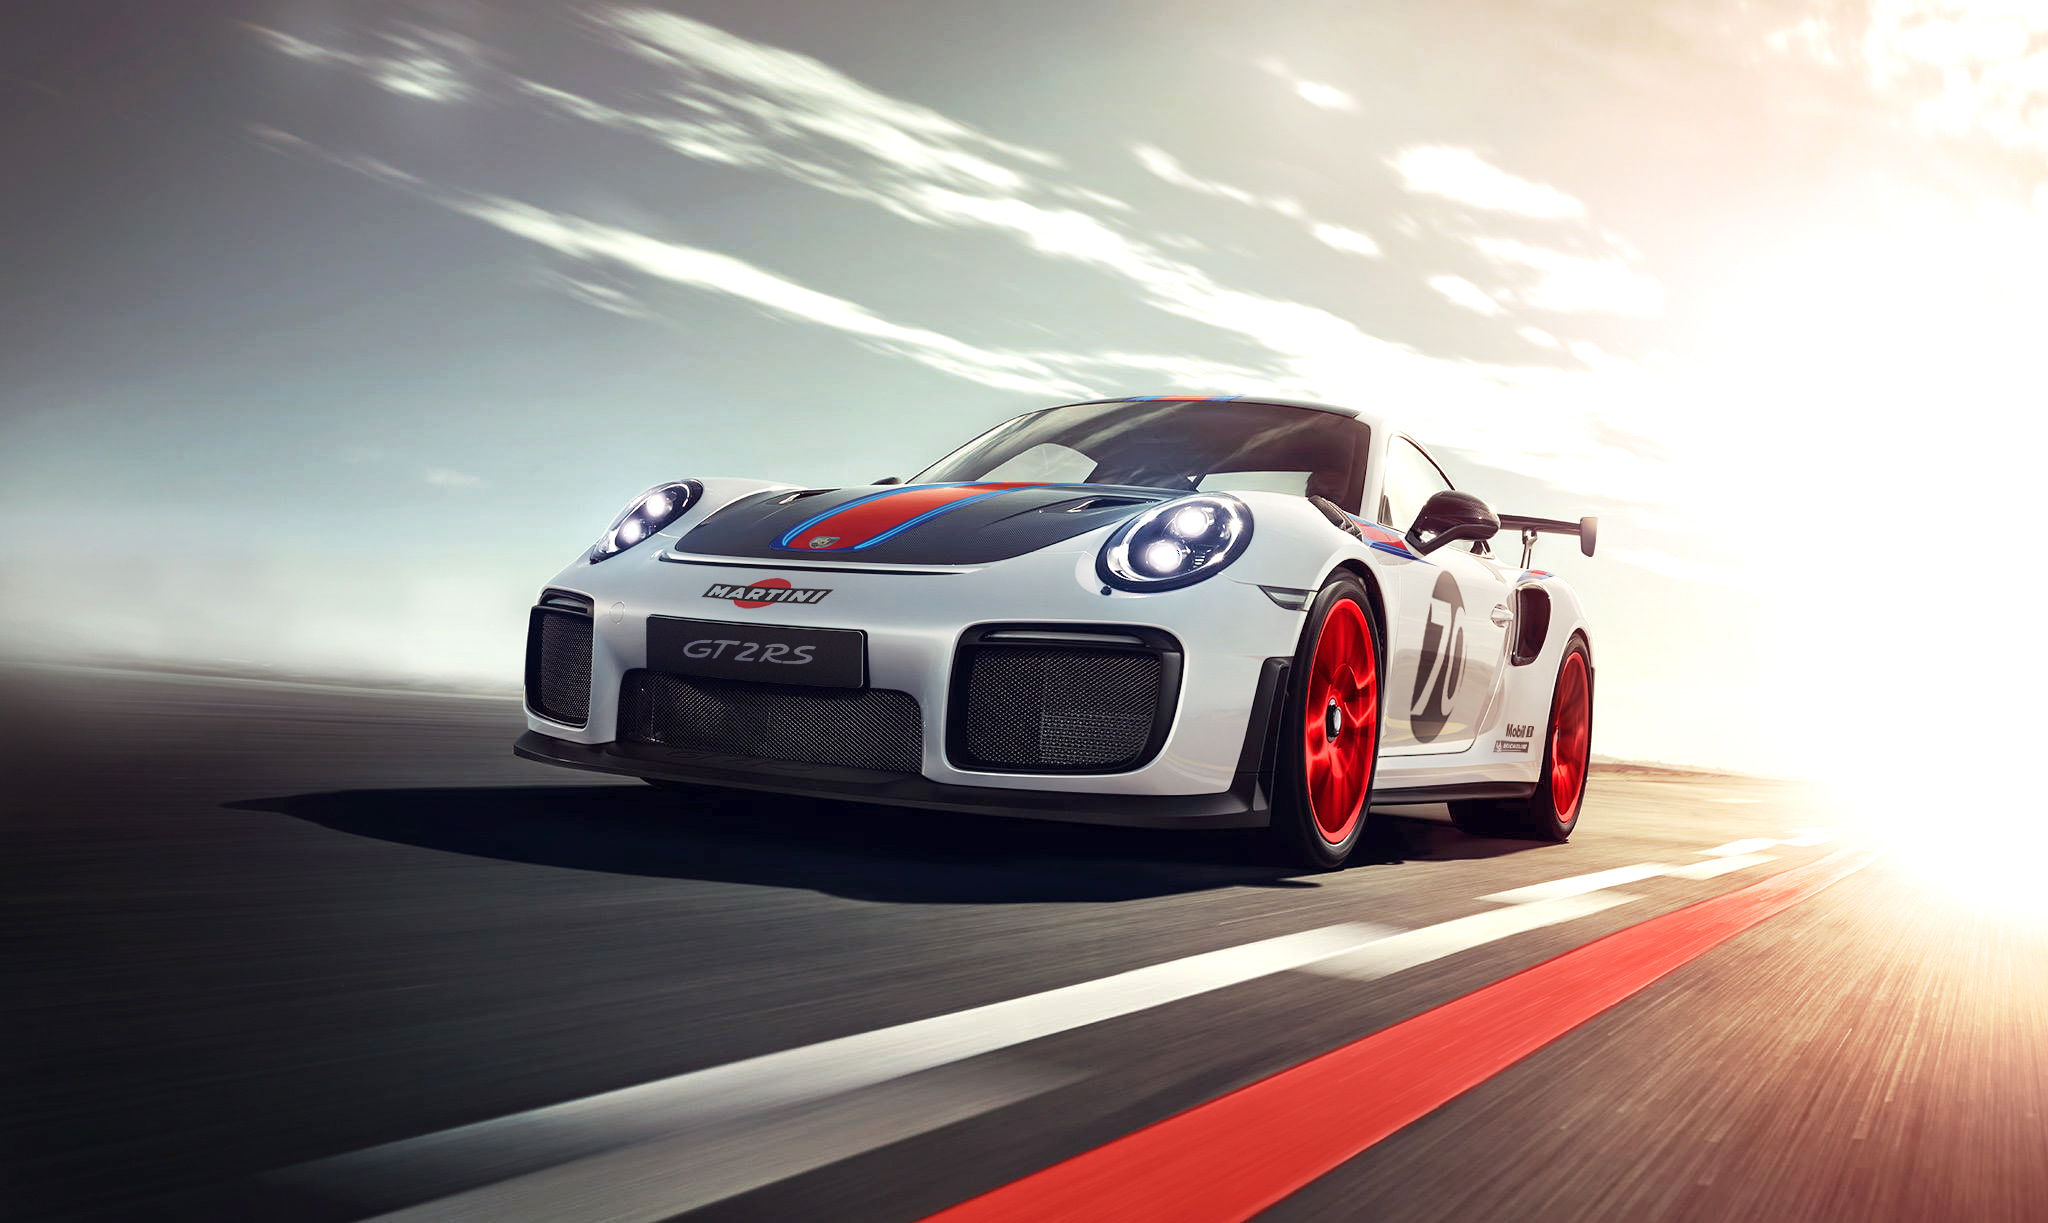 Porsche GT2 RS Track Car 2018, HD Cars, 4k Wallpapers, Images